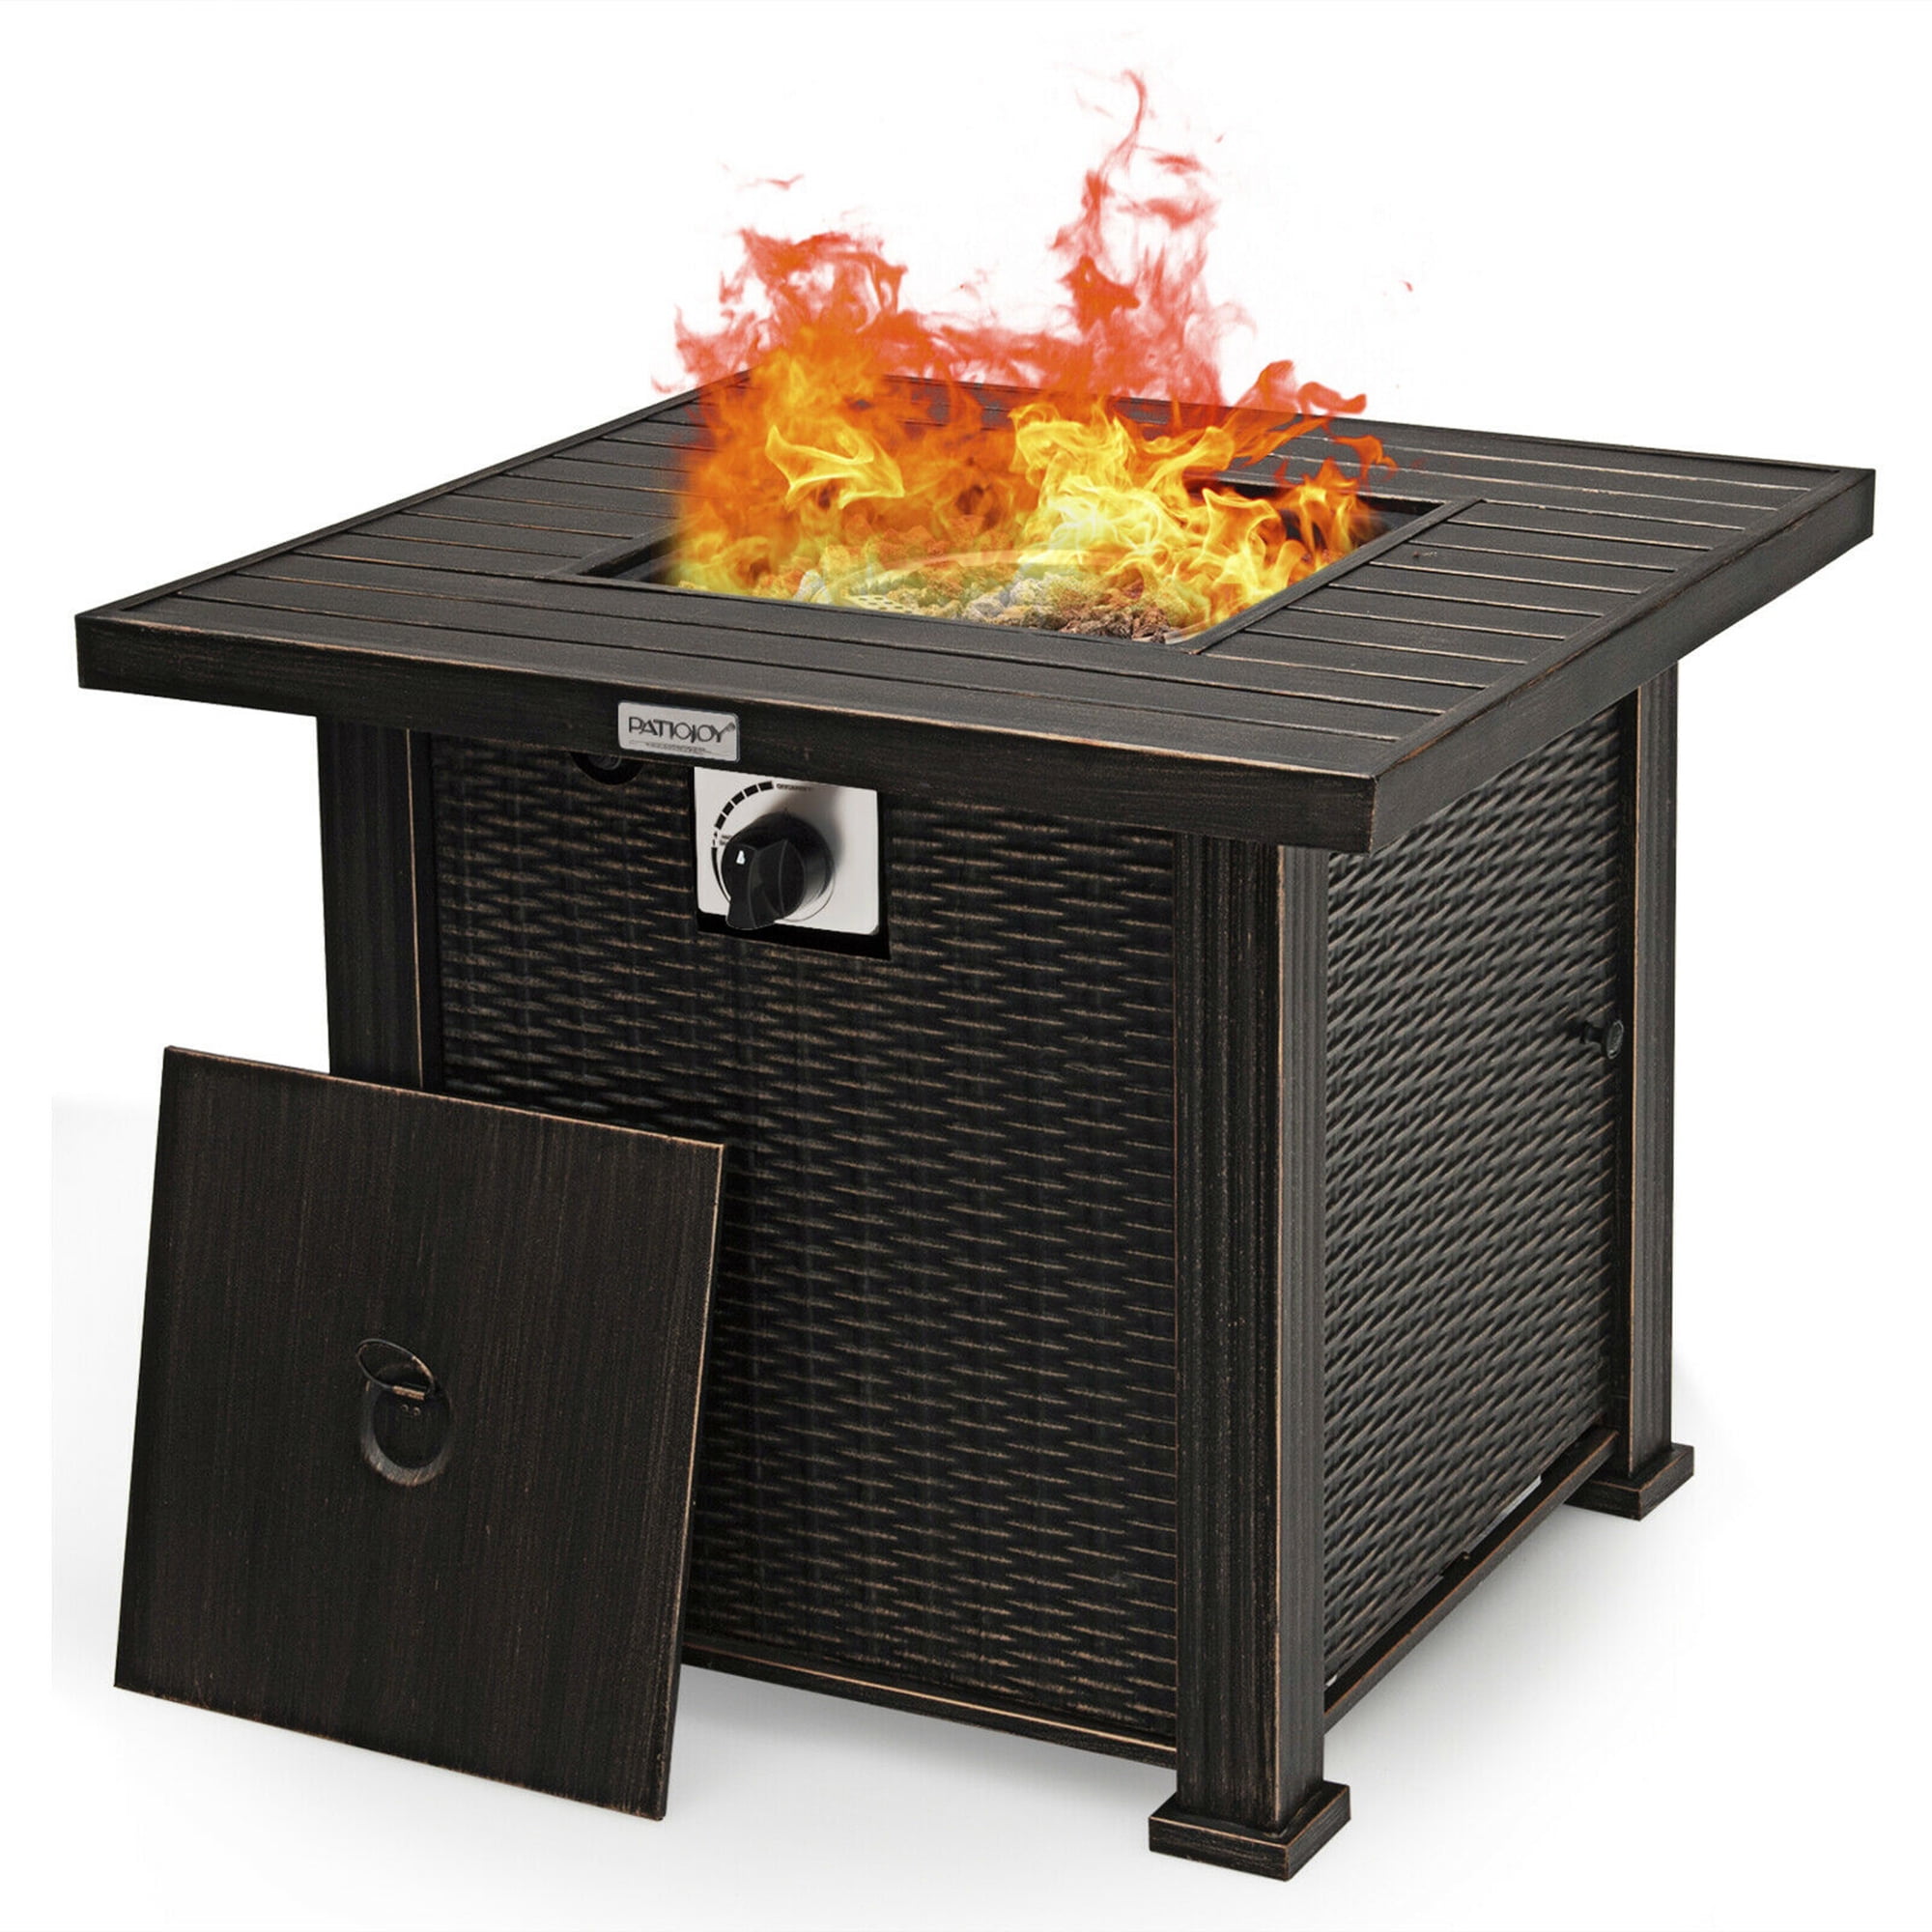 Gymax 30 Gas Fire Pit Table 50 000 Btu Square Propane Fire Pit Table W Cover Walmart Com